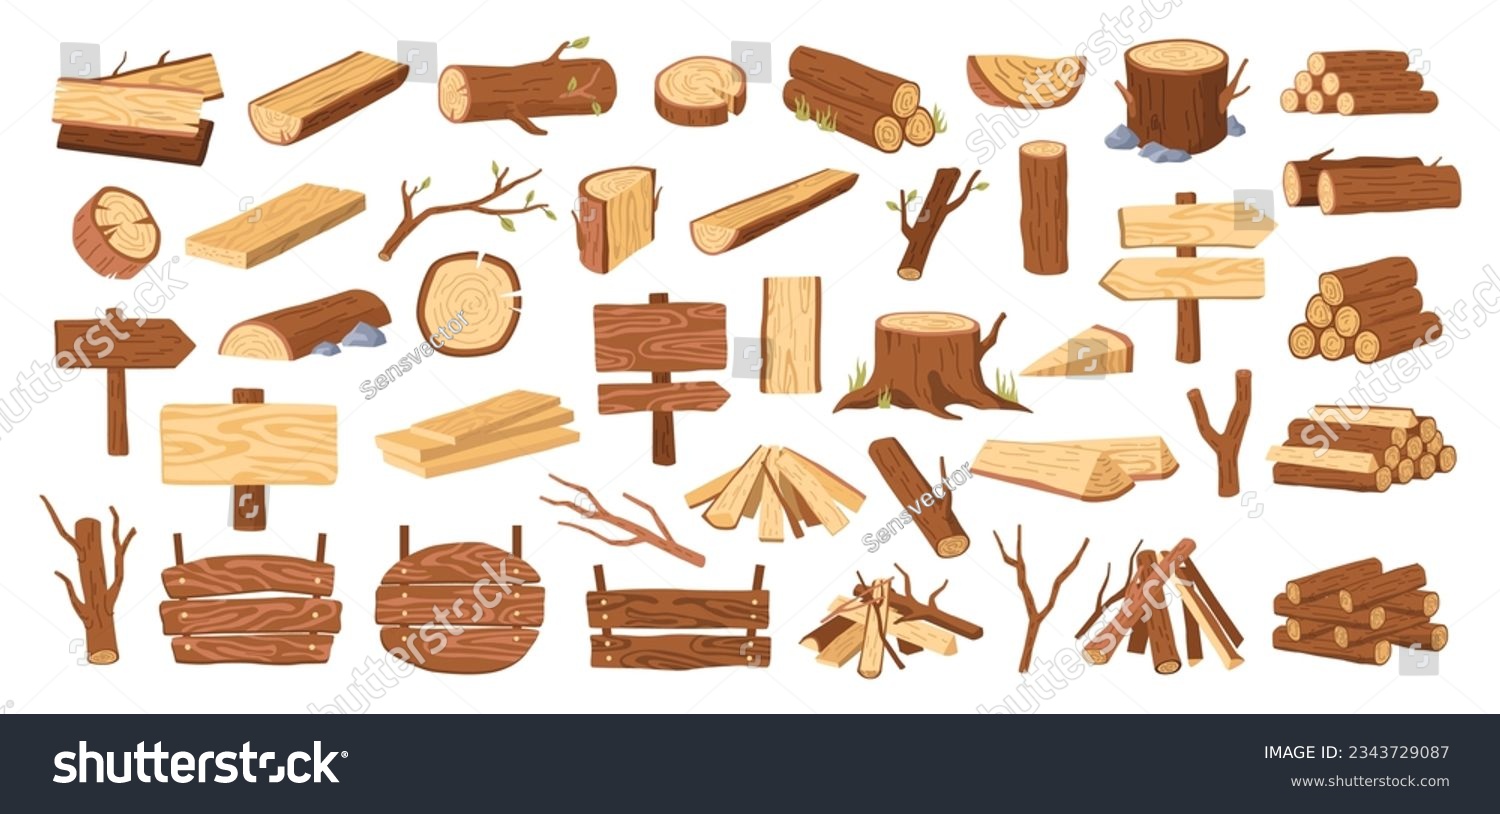 Wood tree logs, stumps and trunks, wooden pieces flat cartoon vector illustration. Lumber and firewood cut branches, lumberjack materials, campfire and woodwork planks big set collection #2343729087